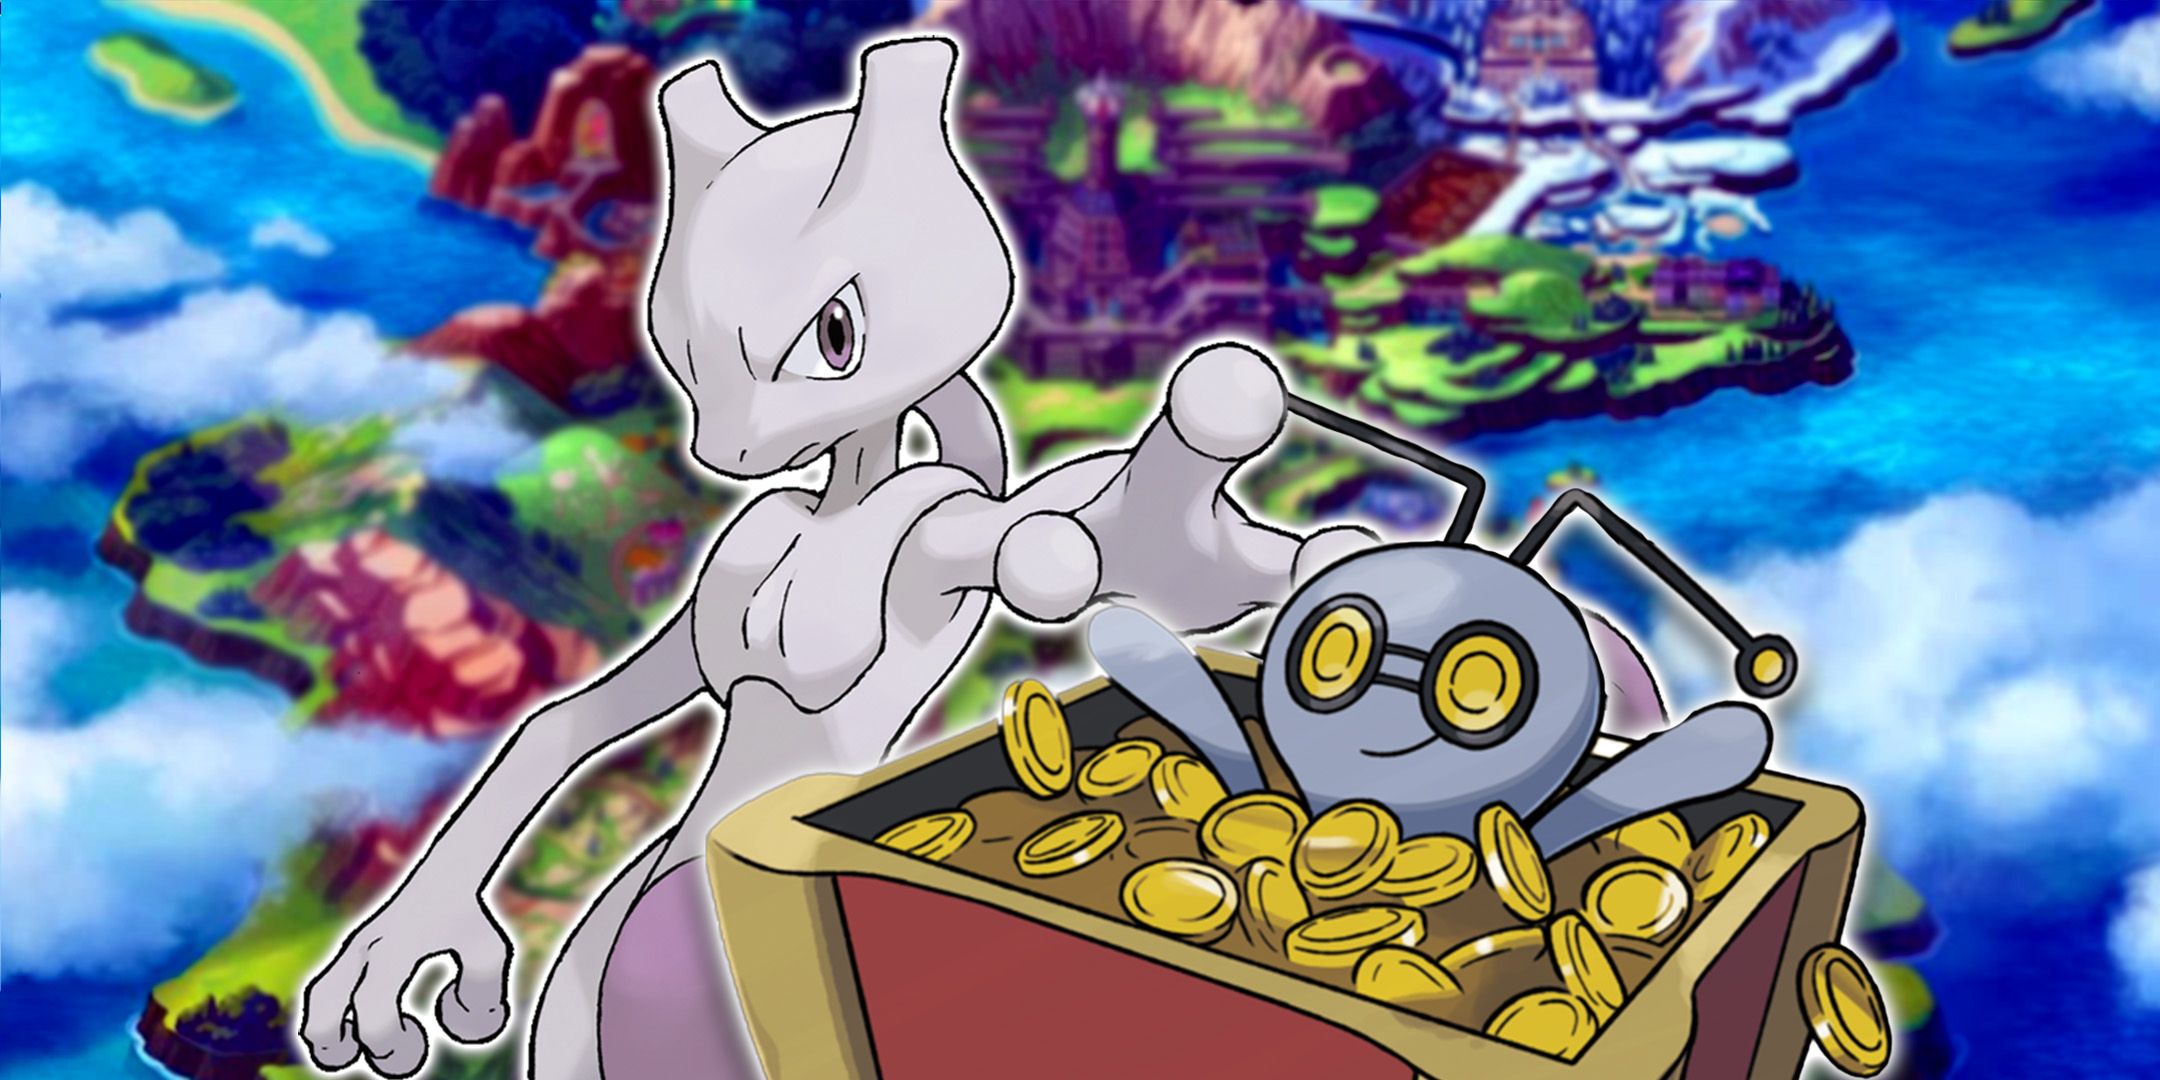 Mewtwo and Gimmighoul Chest form surrounded by coins in front of the region map of Galar